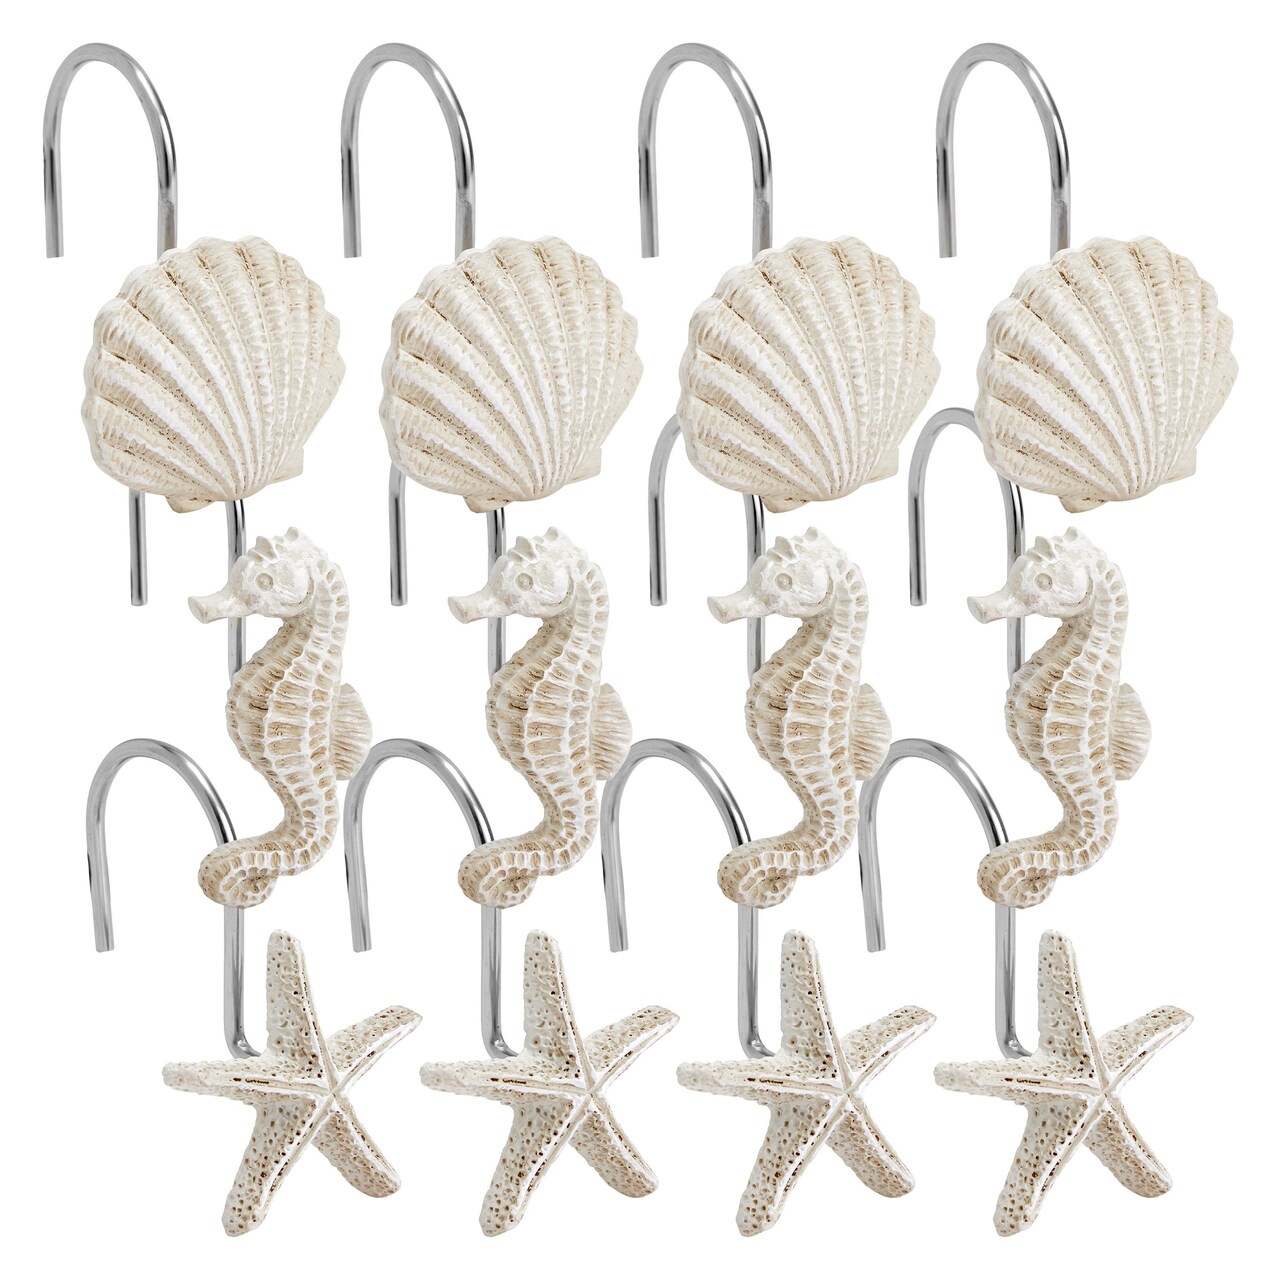 12 Pack Beach Shower Curtain Hooks, Decorative Ocean Themed Design with  Seahorses, Starfish, and Seashells